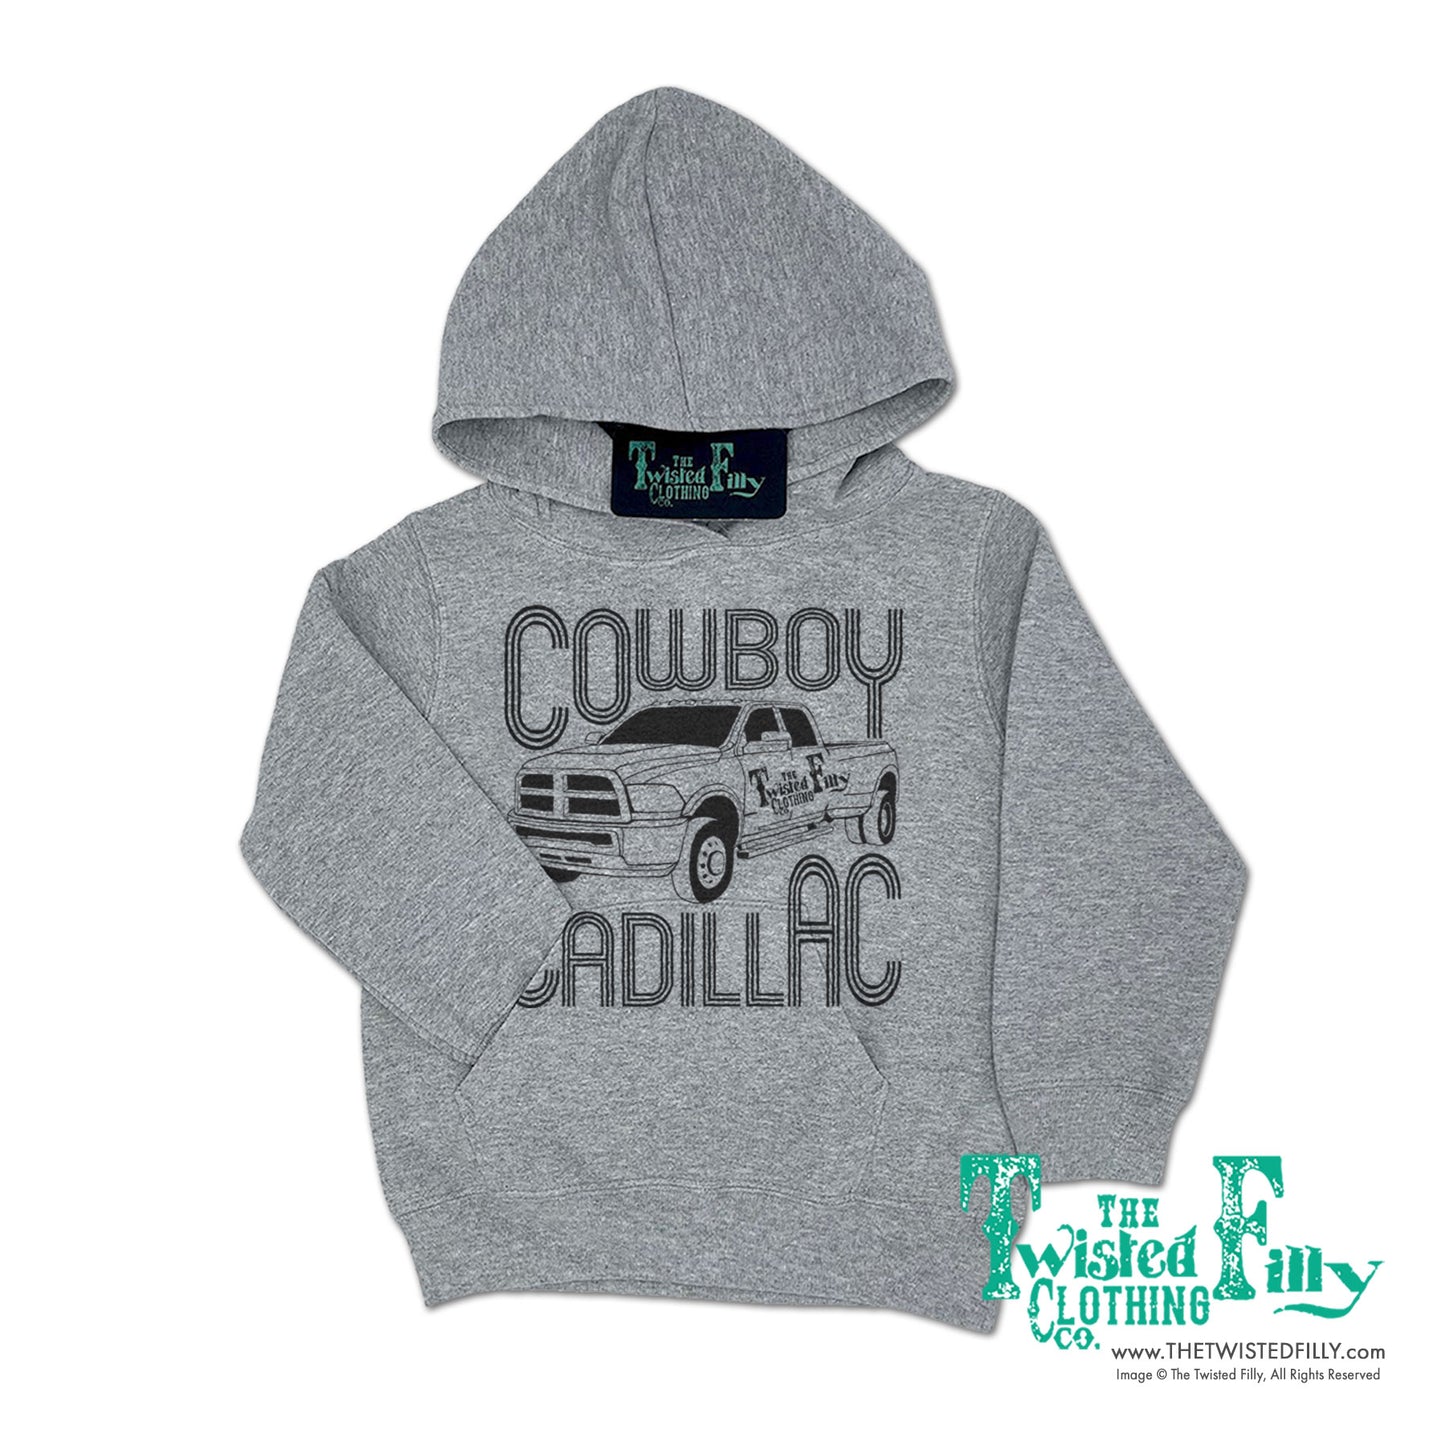 Cowboy Cadillac - Toddler Hoodie - Athletic Heather Gray